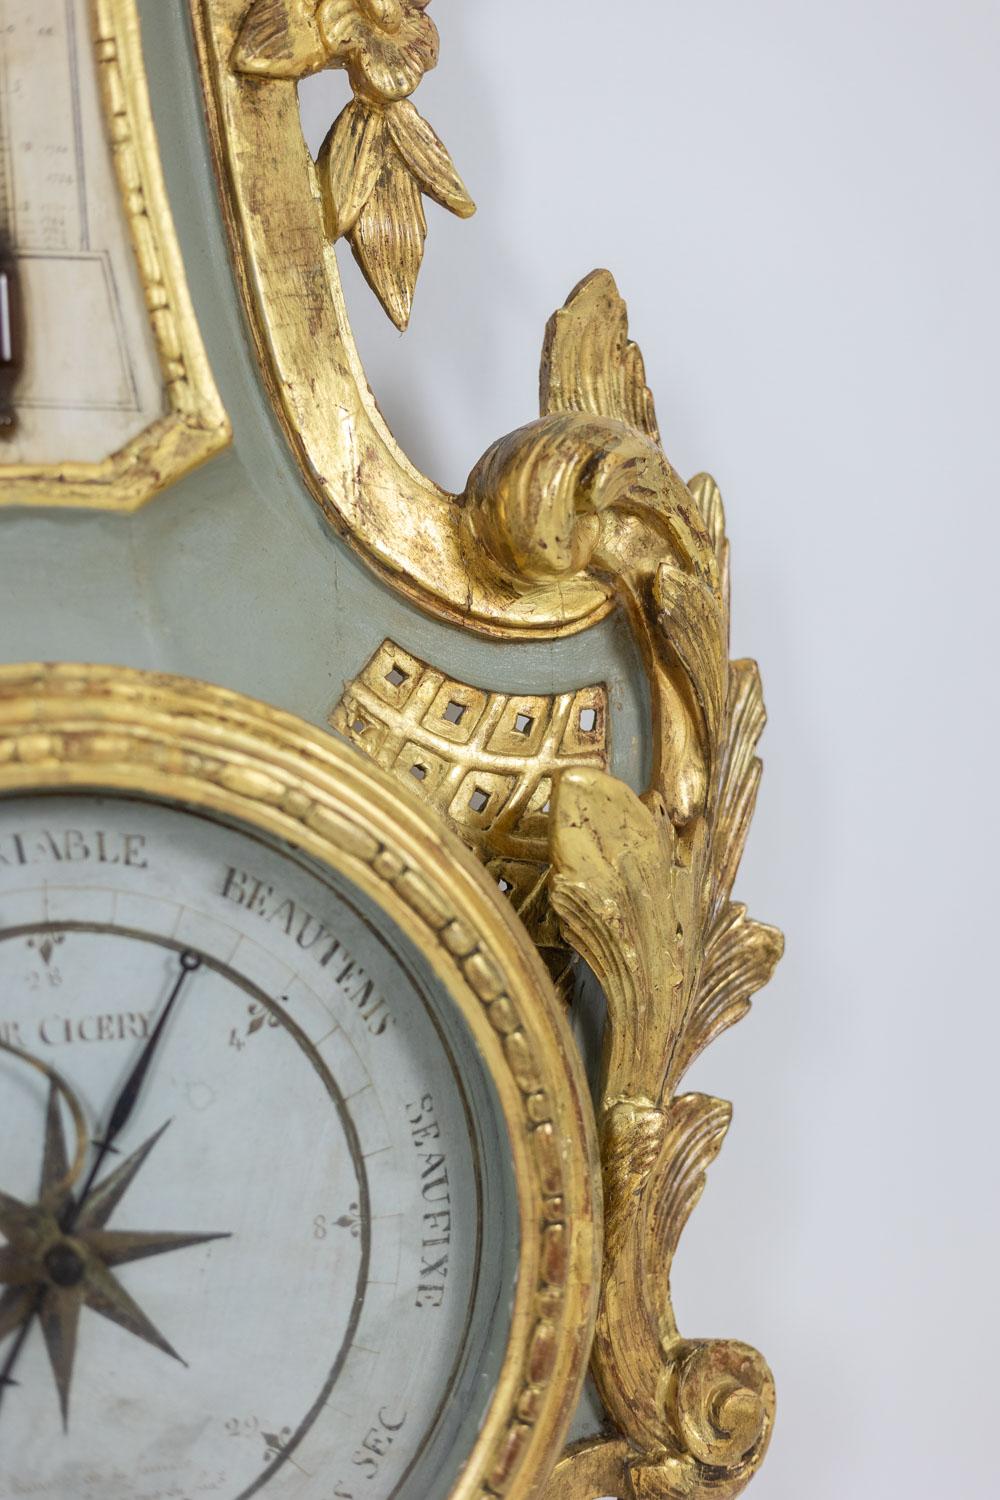 Wood Cicery. Barometer in carved and gilded wood. 18th century period. For Sale